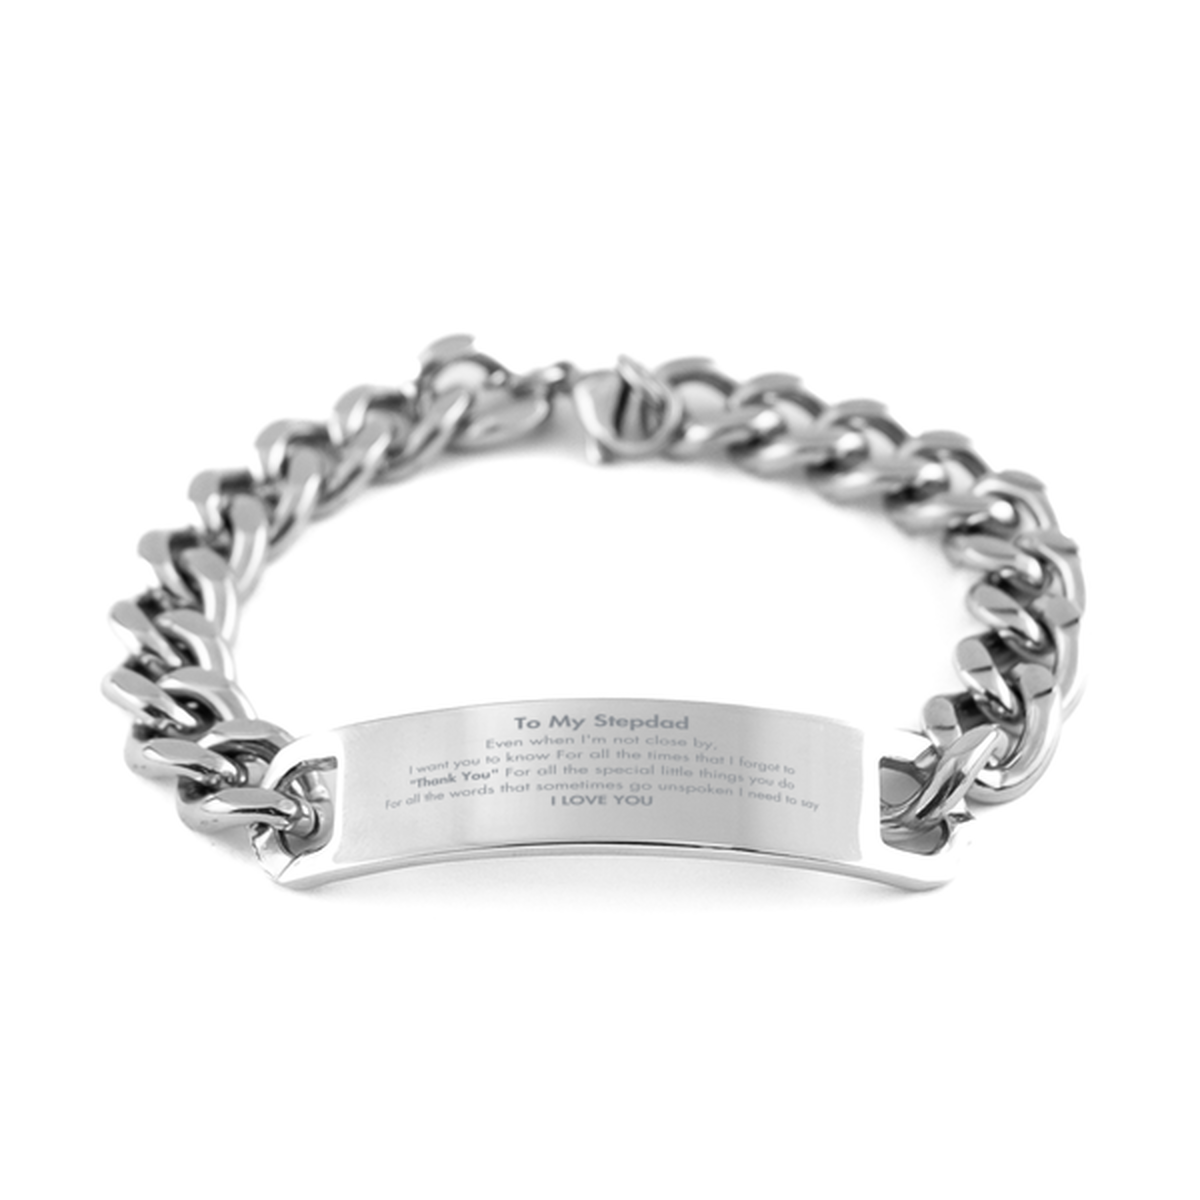 Thank You Gifts for Stepdad, Keepsake Cuban Chain Stainless Steel Bracelet Gifts for Stepdad Birthday Mother's day Father's Day Stepdad For all the words That sometimes go unspoken I need to say I LOVE YOU